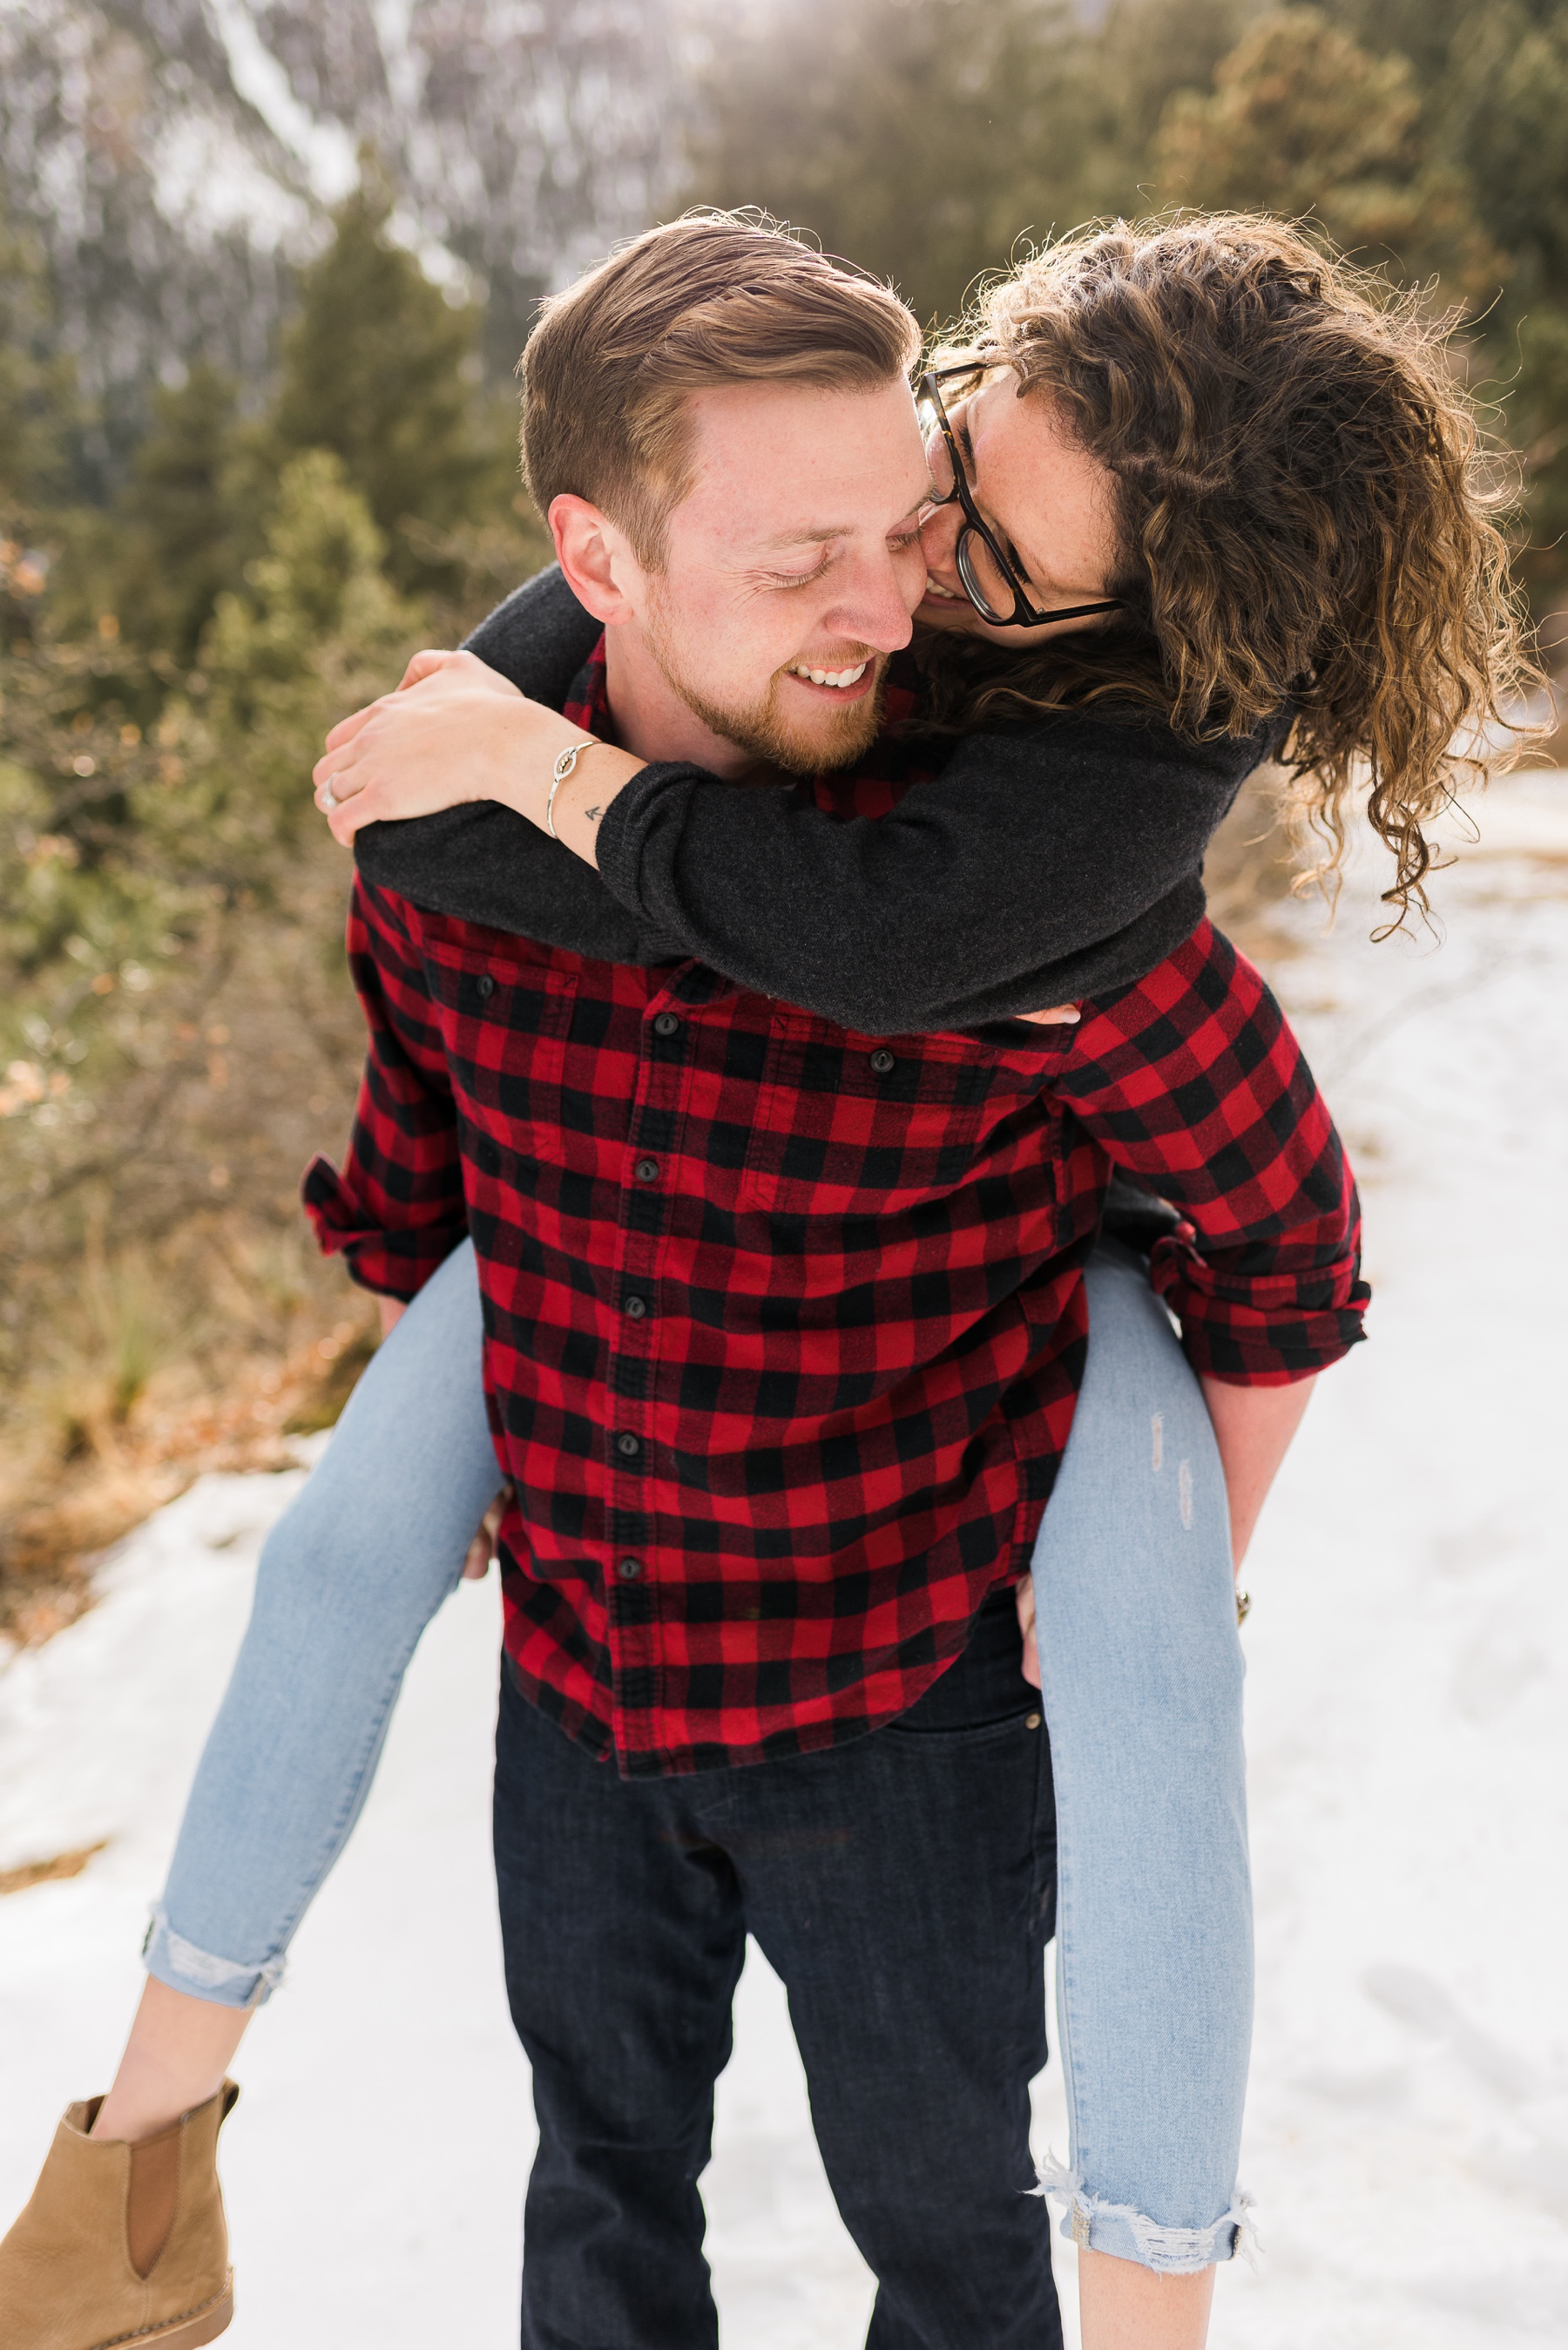 Man smiling with woman piggy back for engagement photos